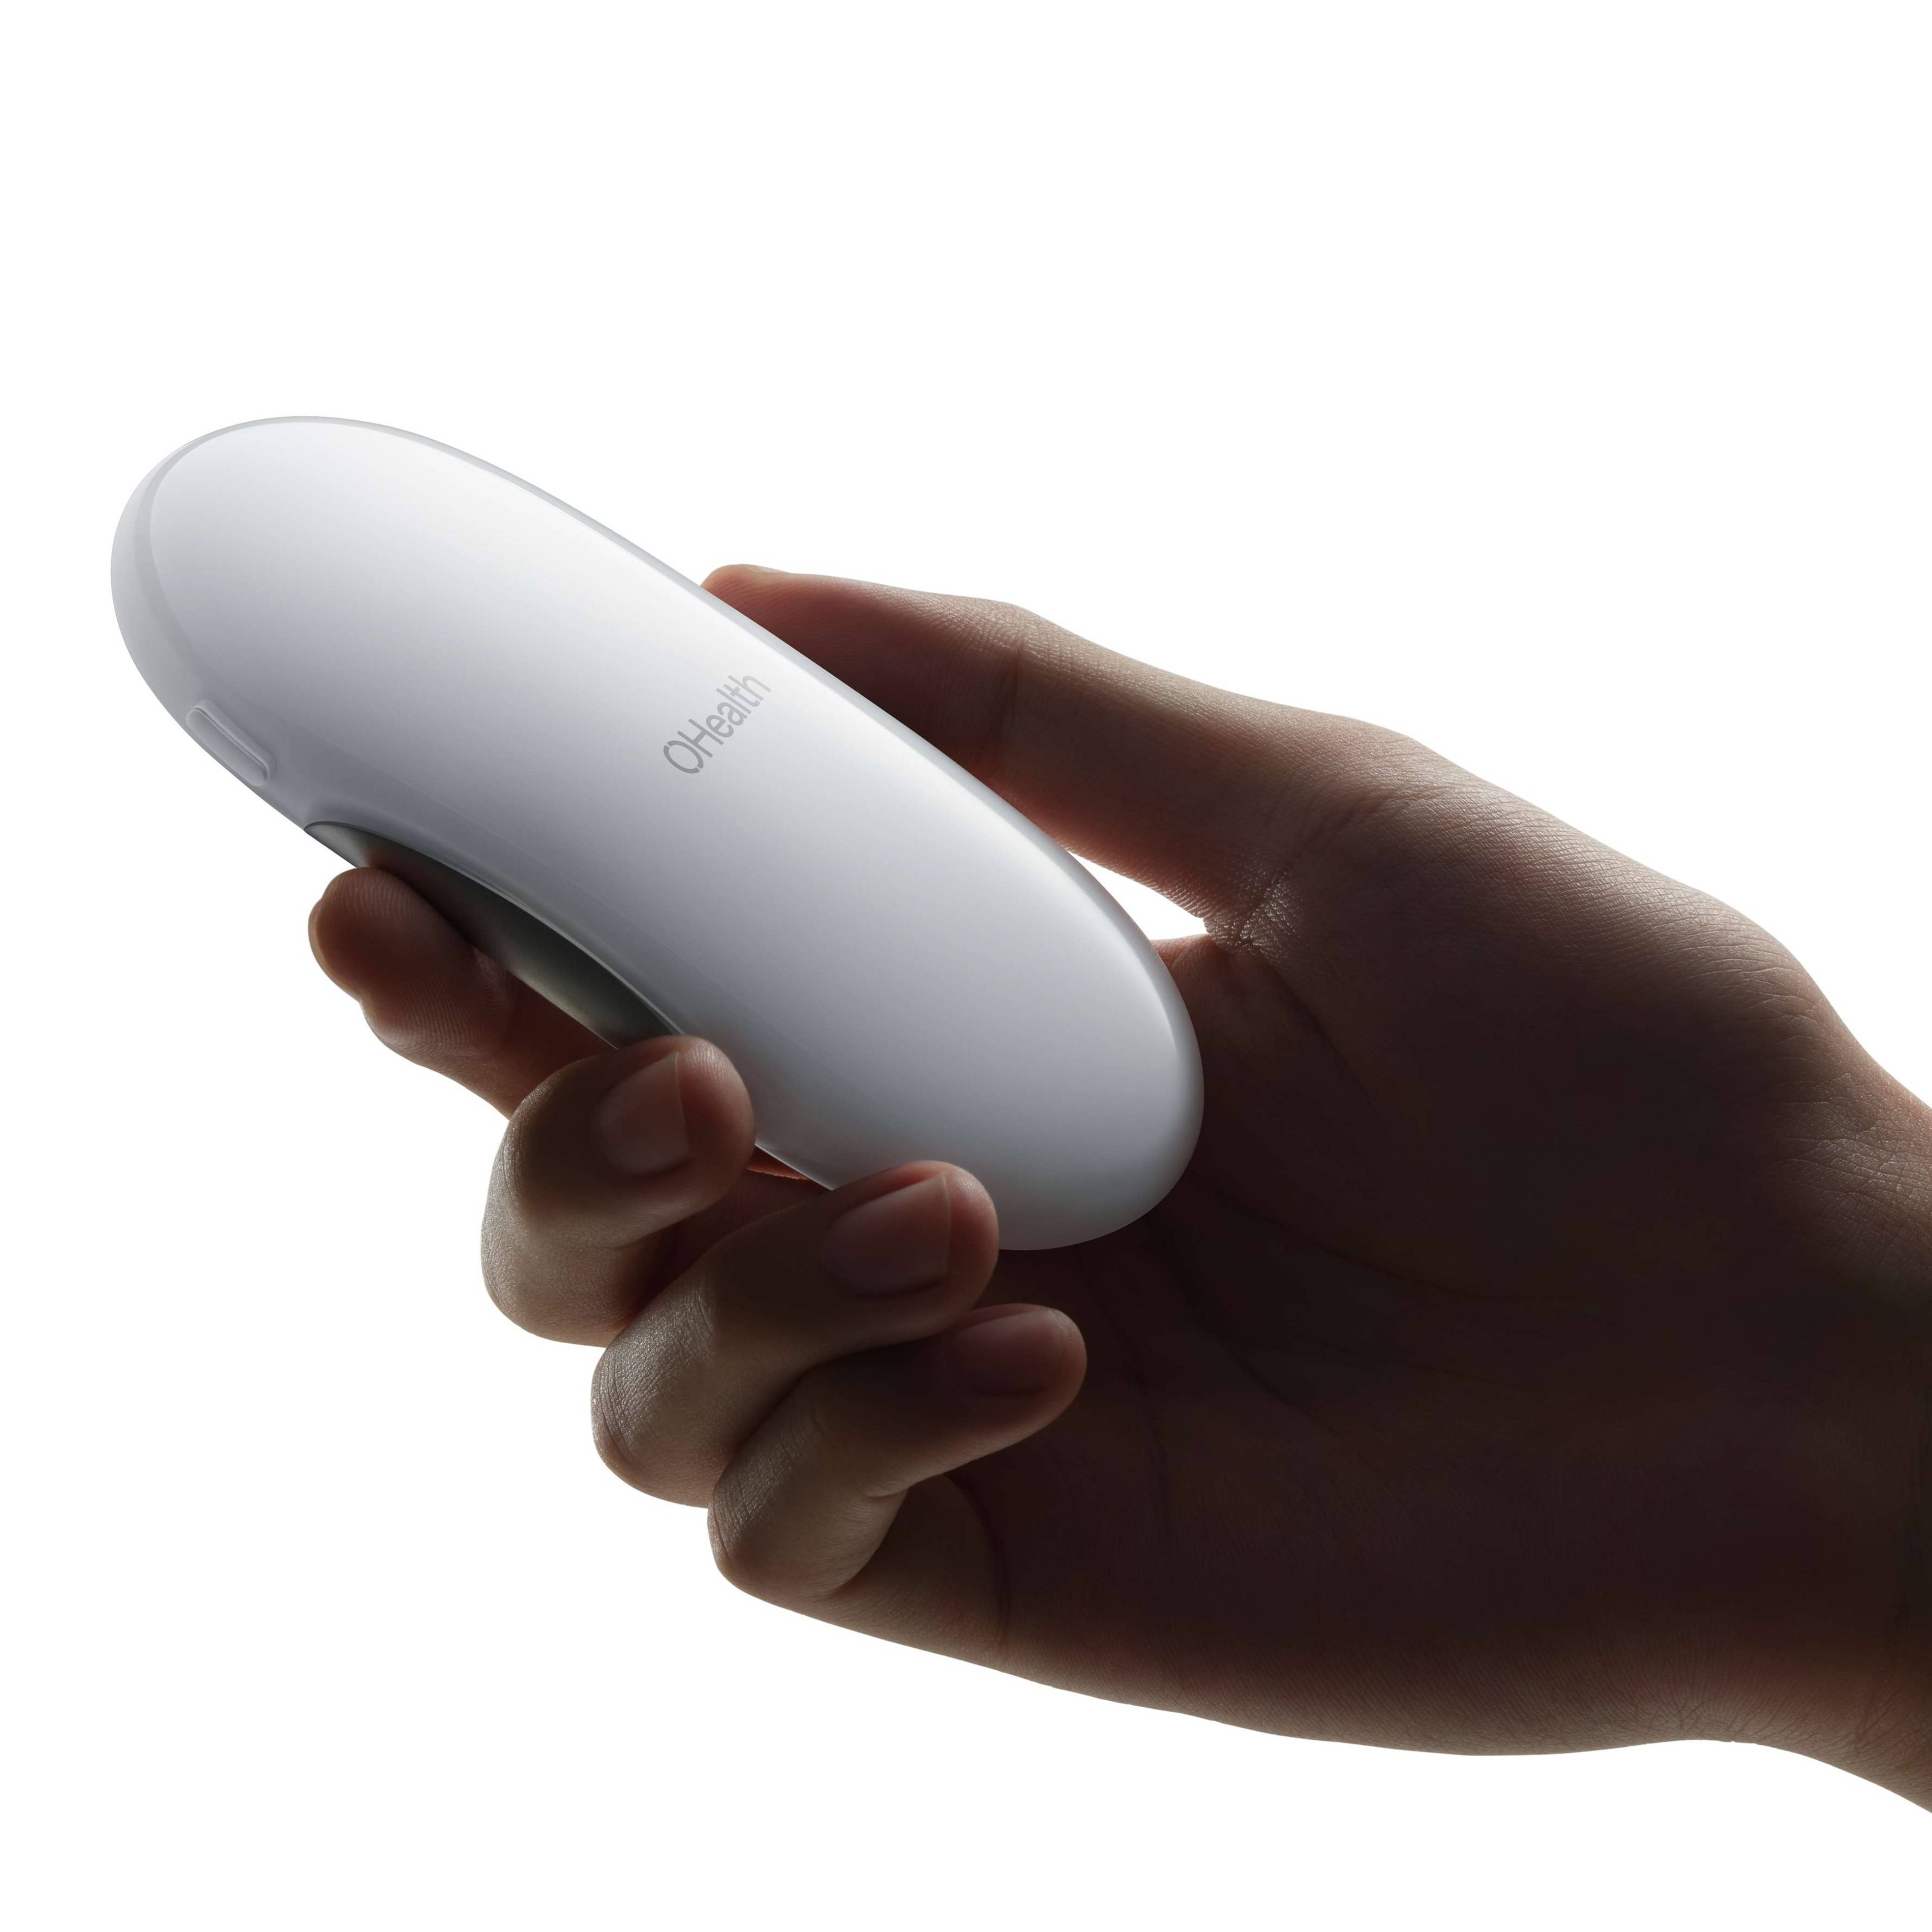 Temperature measurement, ECG, heart rate monitoring – and no clinics.  Oppo Unveils OHealth H1 for Home Biomonitoring